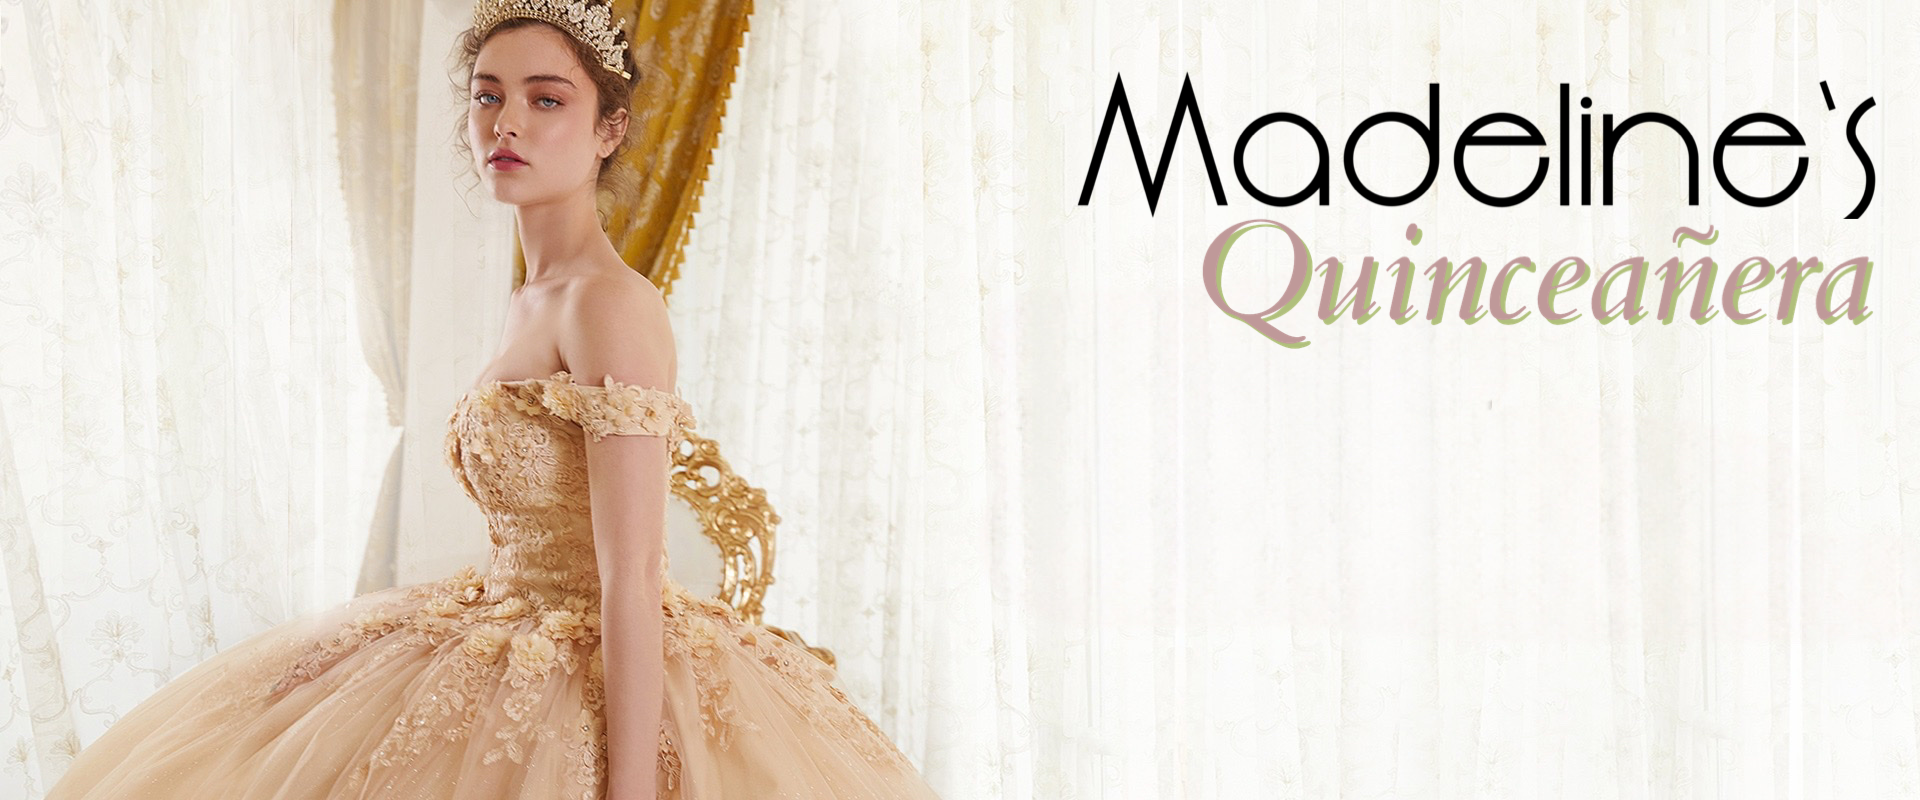 Celebrate your Quinceañera milestone with our exquisite collection of stunning dresses and ensembles designed to make you shine on your special day.